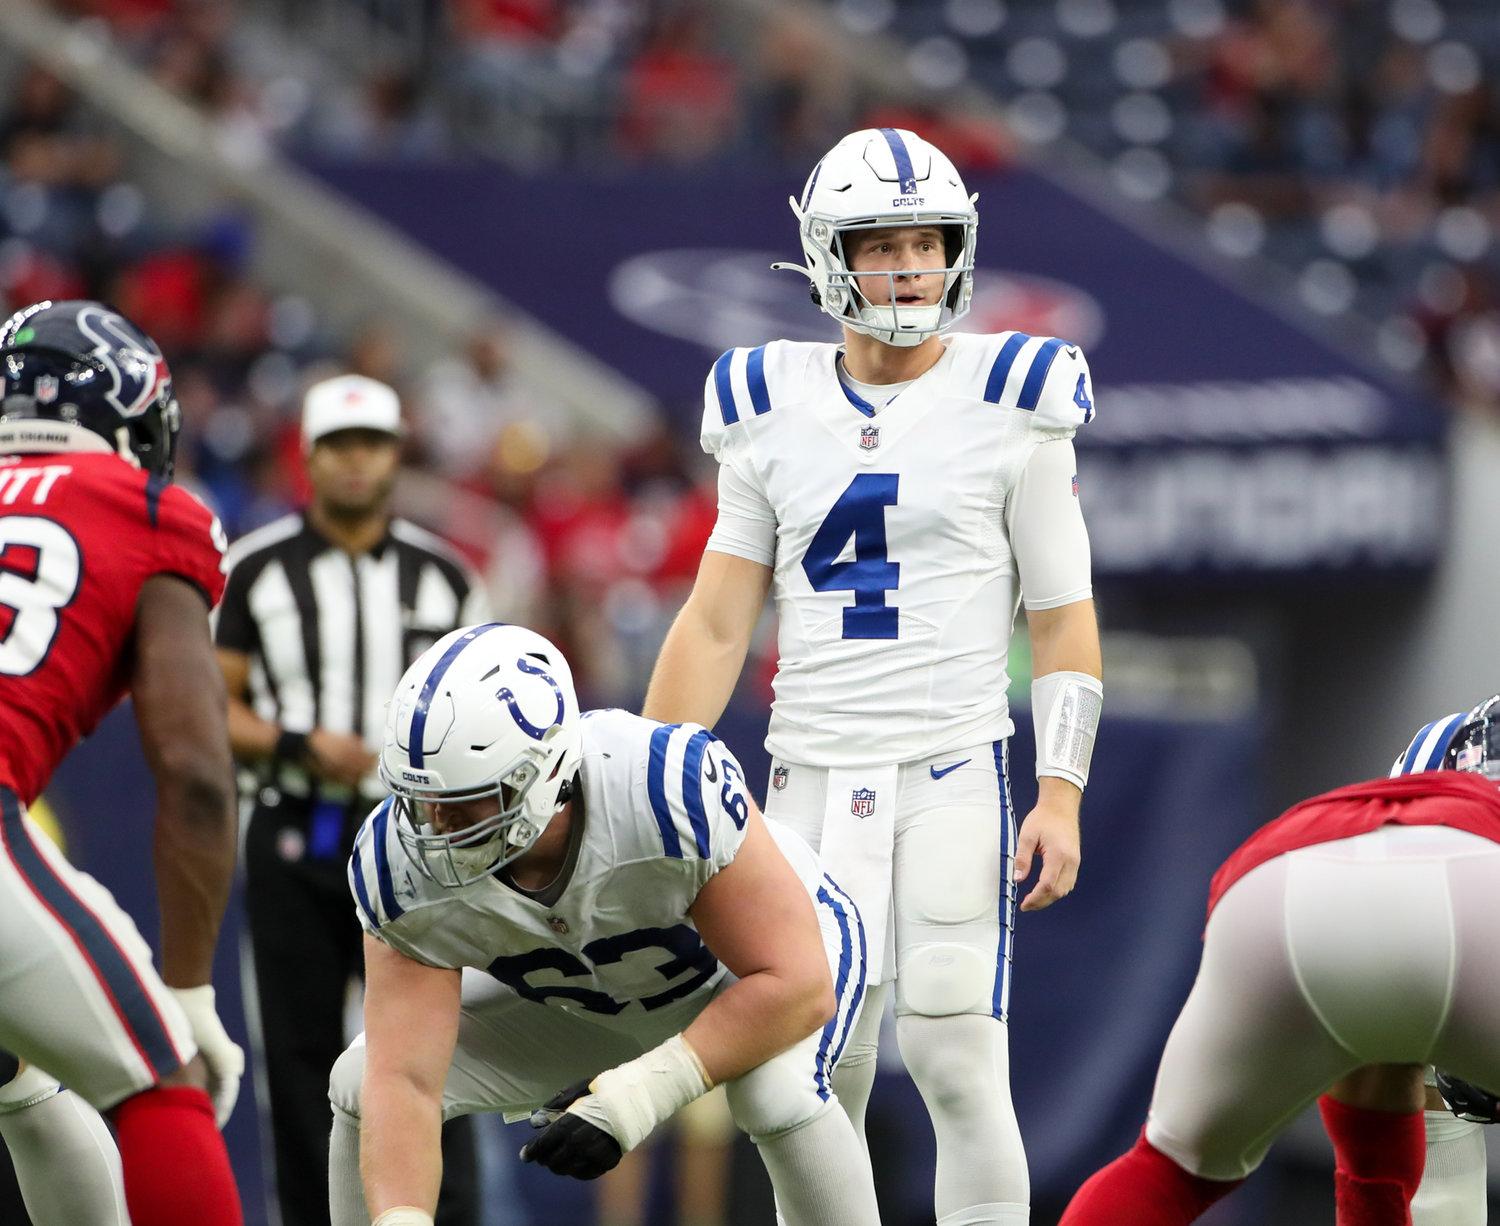 Indianapolis Colts quarterback Sam Ehlinger (4) during an NFL game between the Texans and the Colts on December 5, 2021 in Houston, Texas. The Colts won, 31-0.